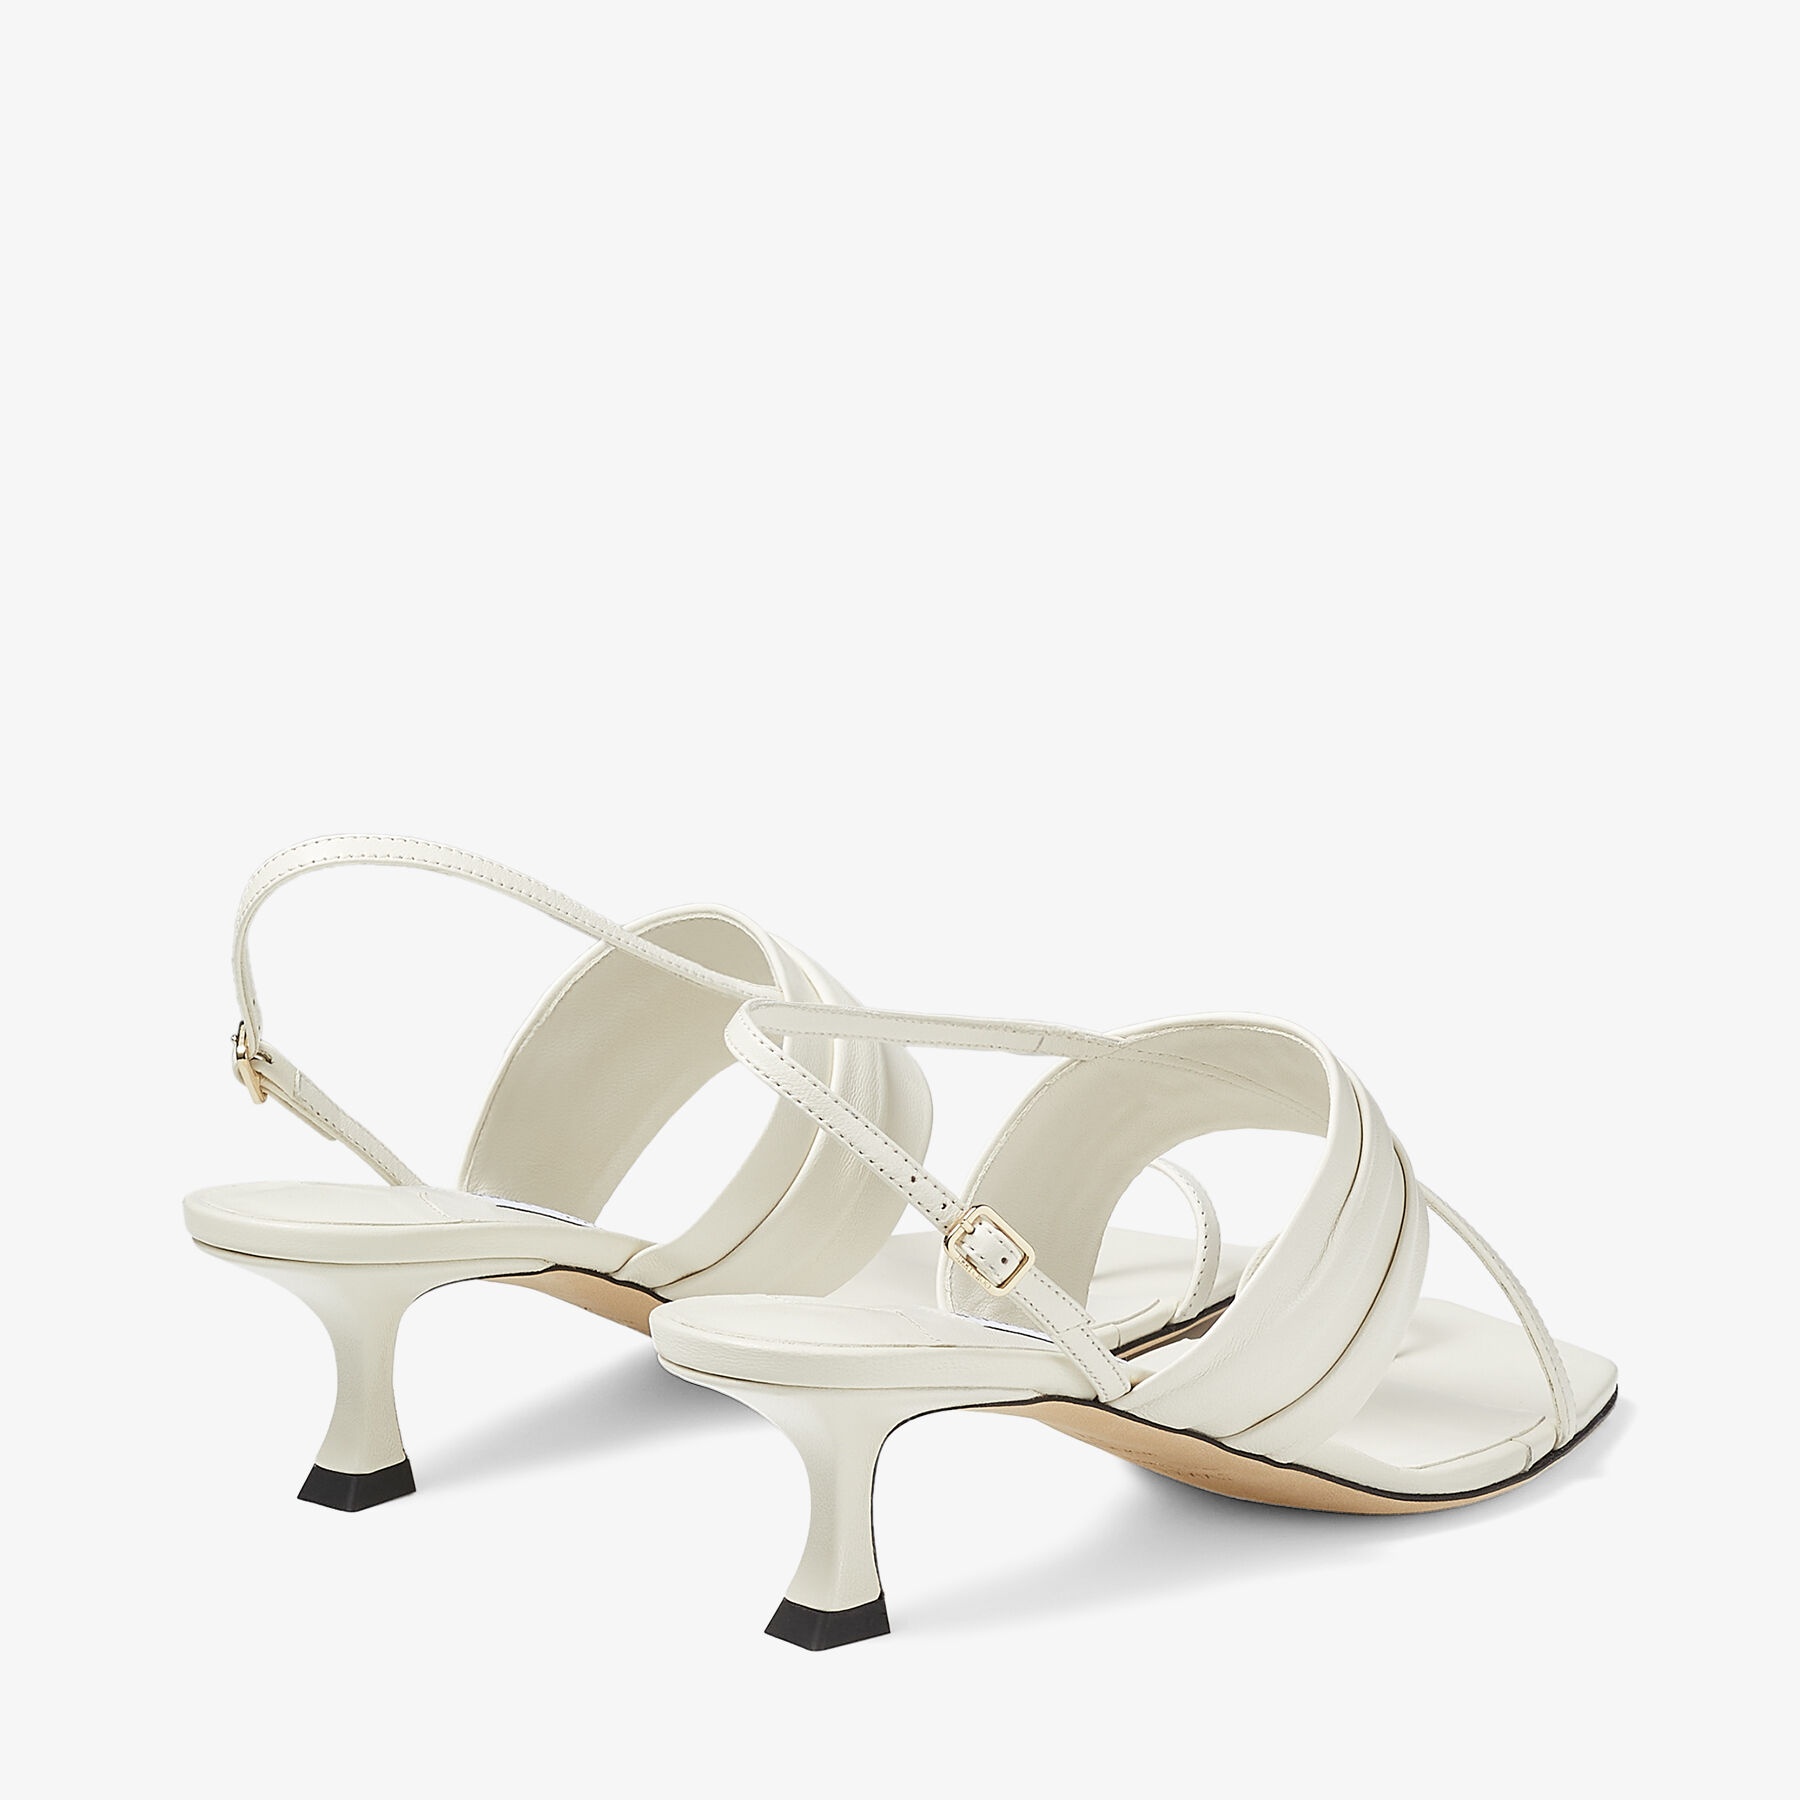 Beziers 50
Latte Nappa Leather Sandals - 6